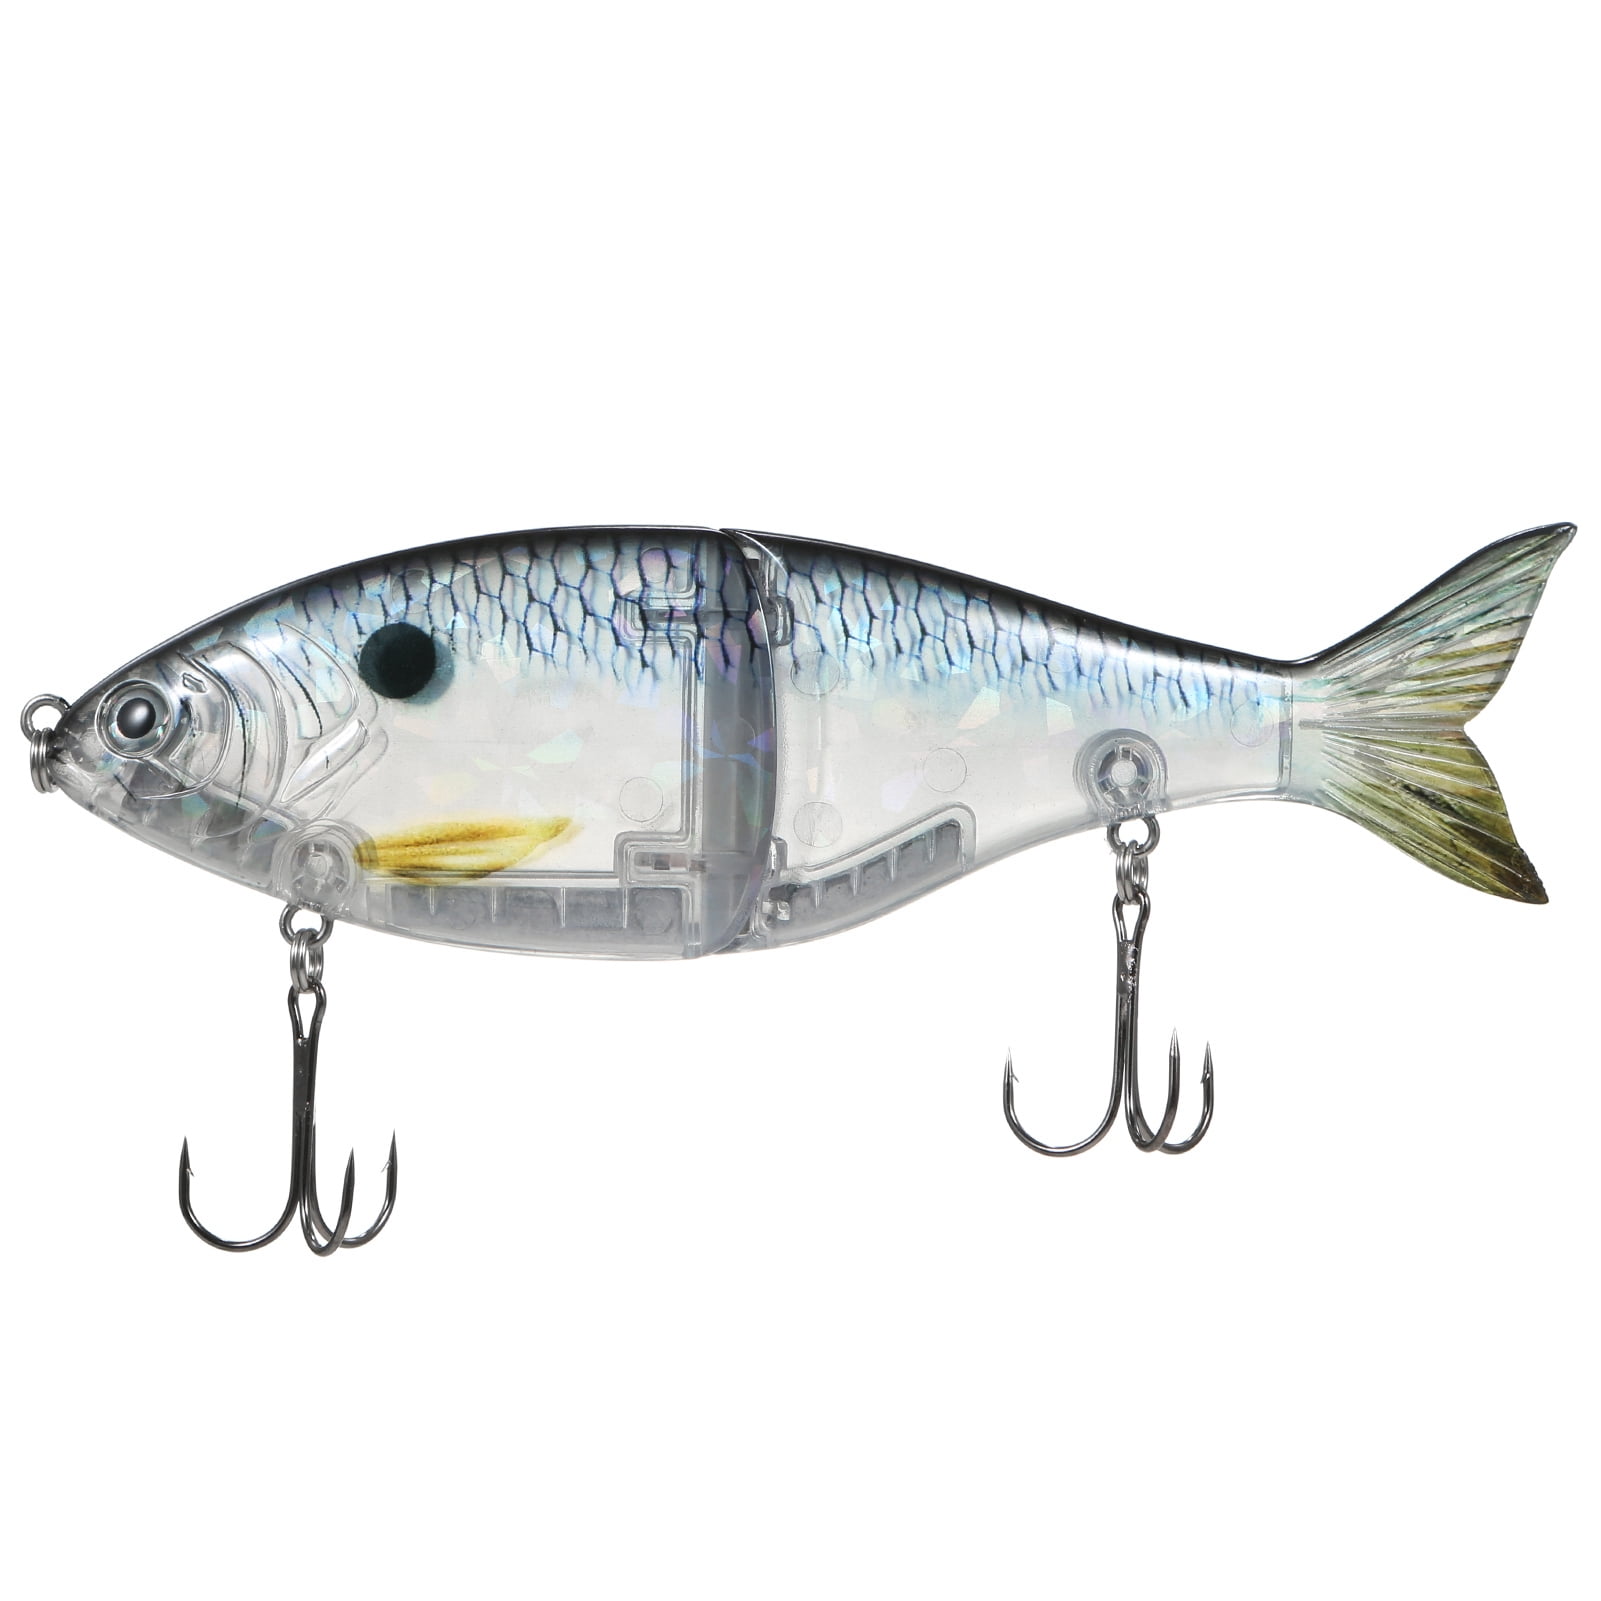 Taruor TARUOR Glider Fishing Lures 178mm Glide Bait Jointed Swimbait  Artificial Hard Baits Lures with Treble Hooks 